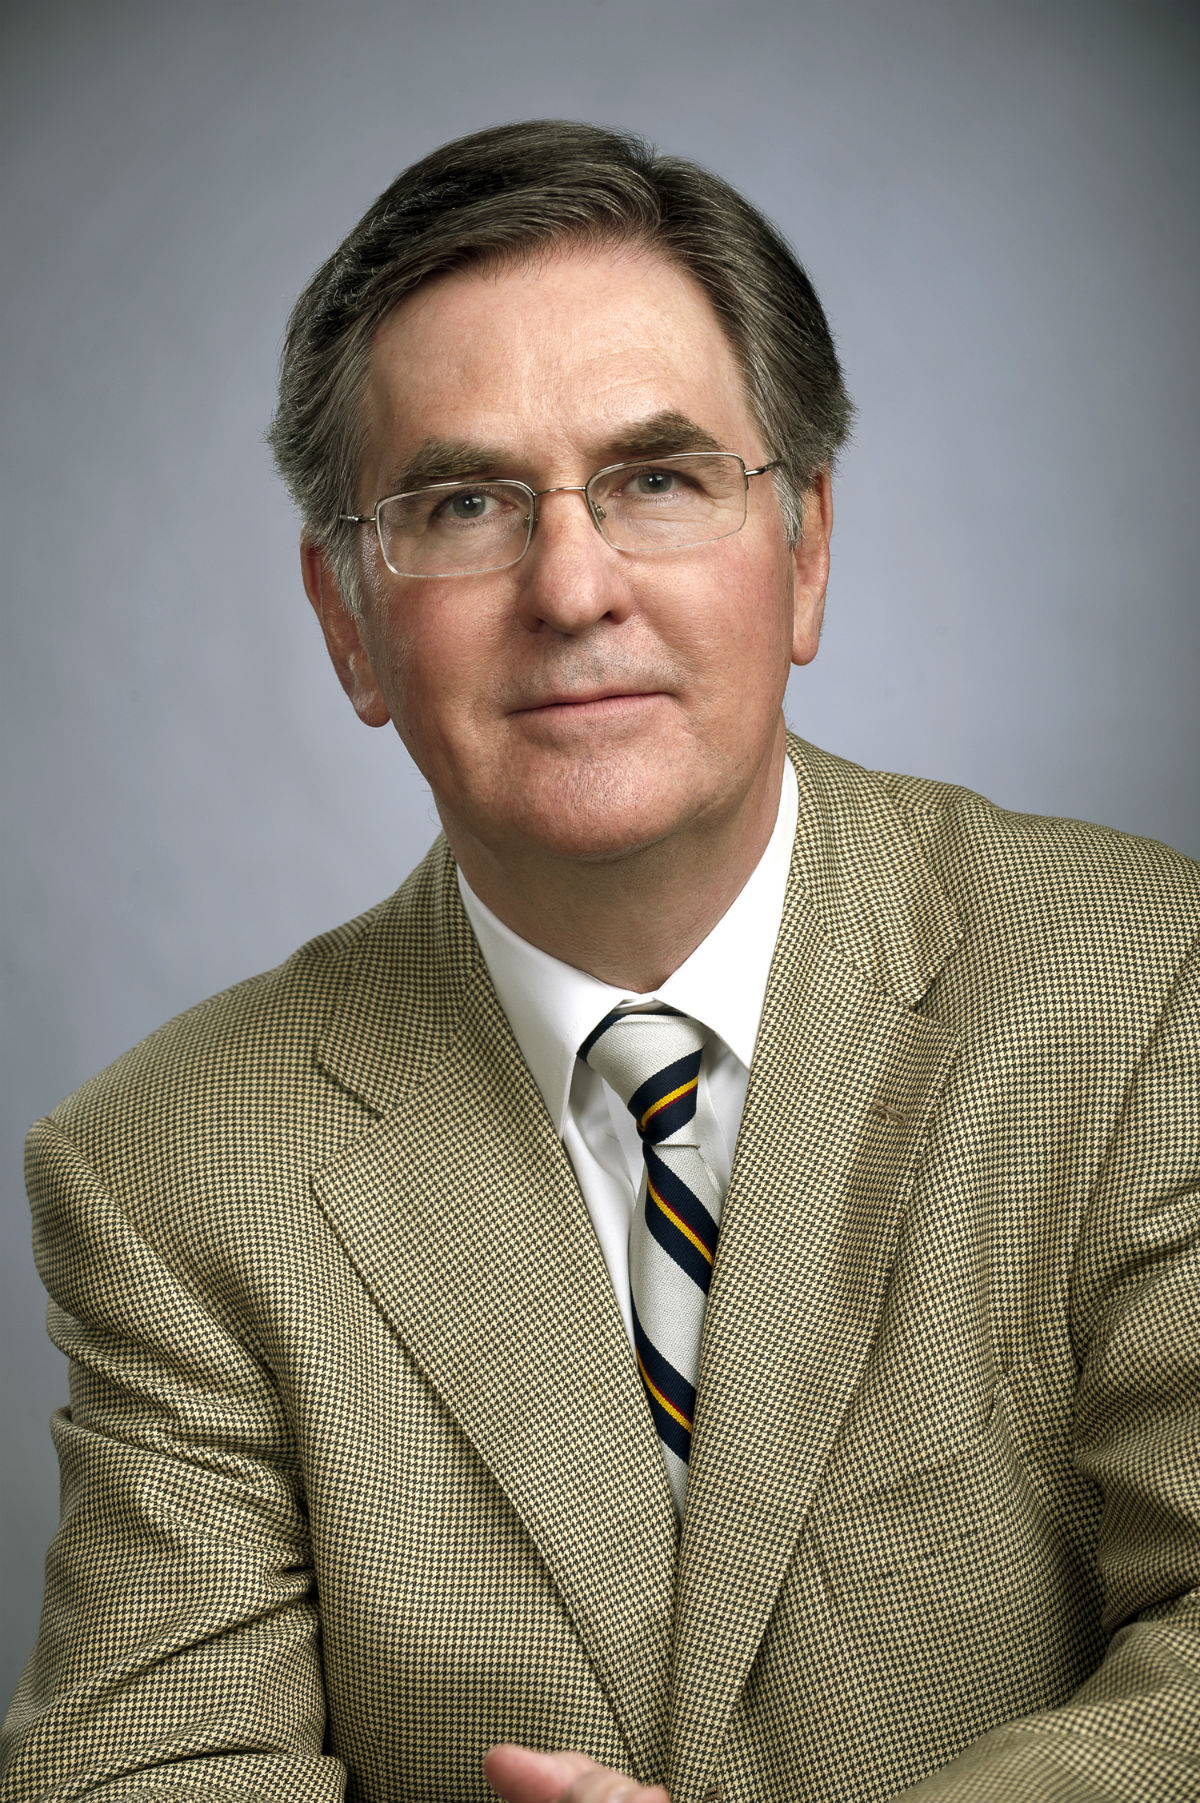 Dr. Donald Douglas Miller, the newly appointed dean of the School of Medicine at New York Medical College, is an internationally recognized cardiologist, clinician-scientist and leader in academic medicine.